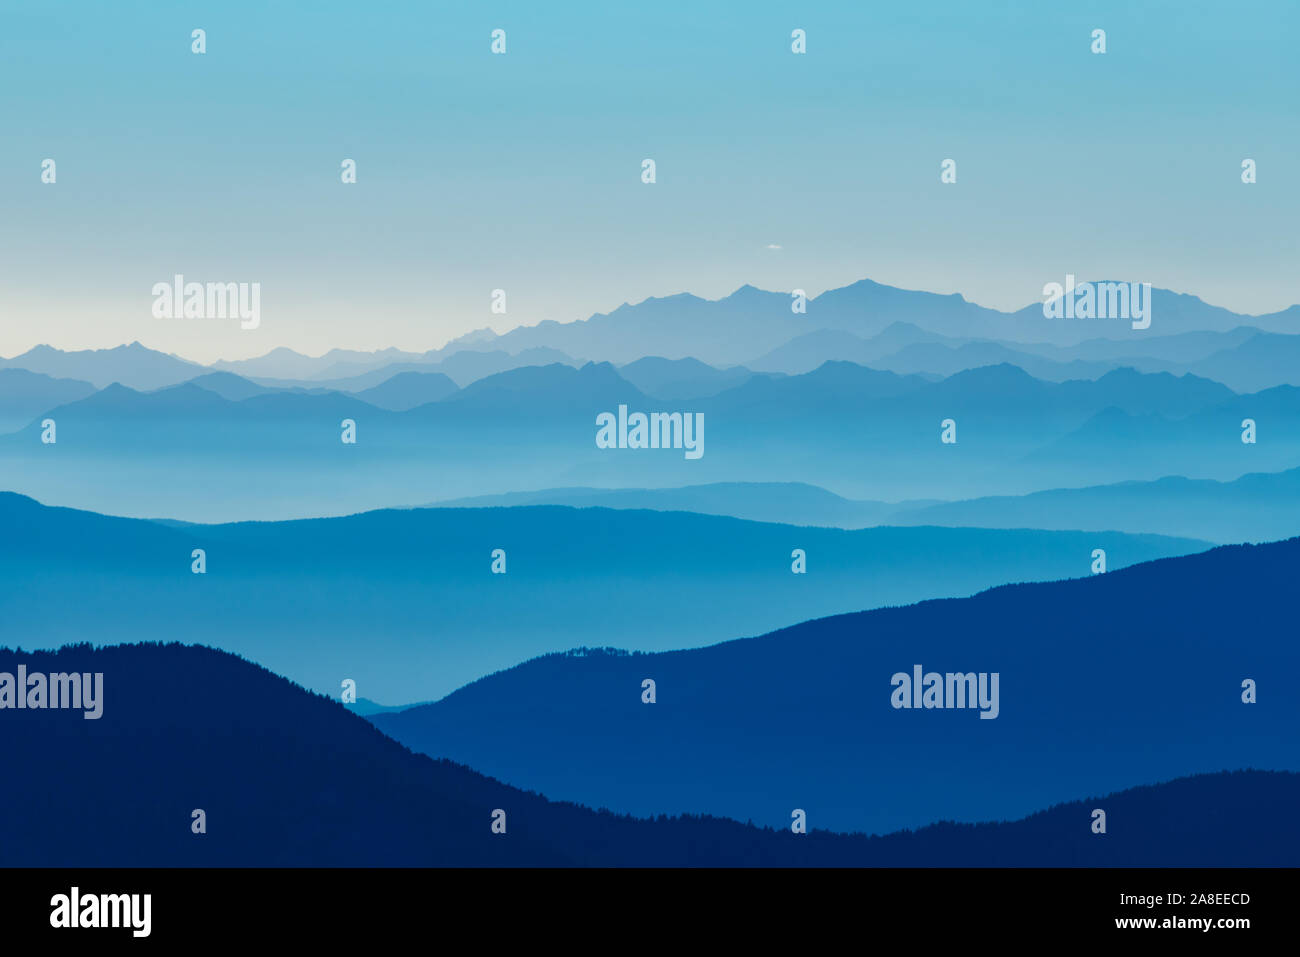 Mountain ranges of the Alps in the horizon under a blue mist Stock Photo